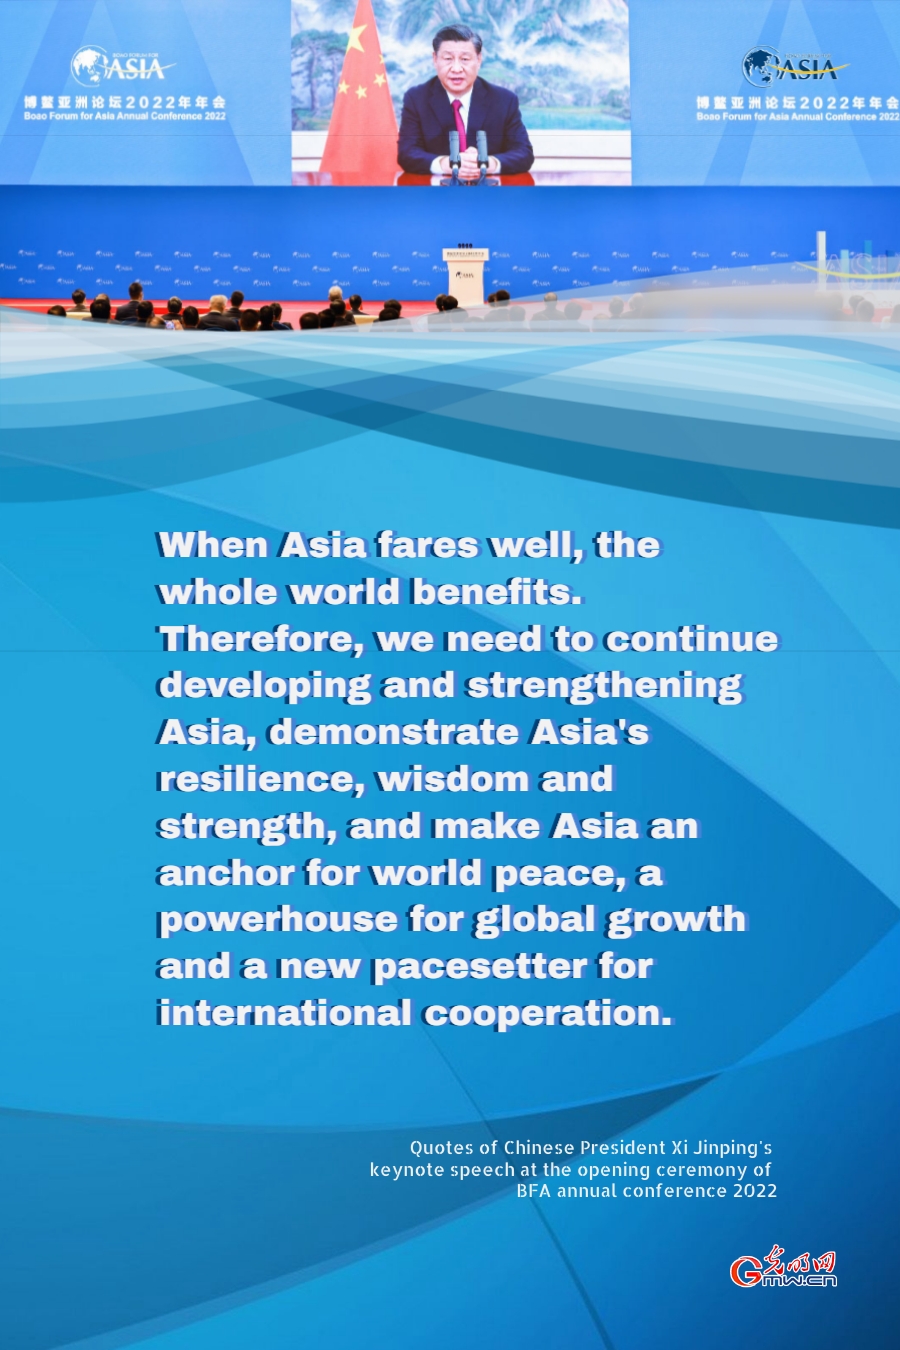 Highlight of Xi's speech at BFA 2022: When Asia fares well, the whole world benefits